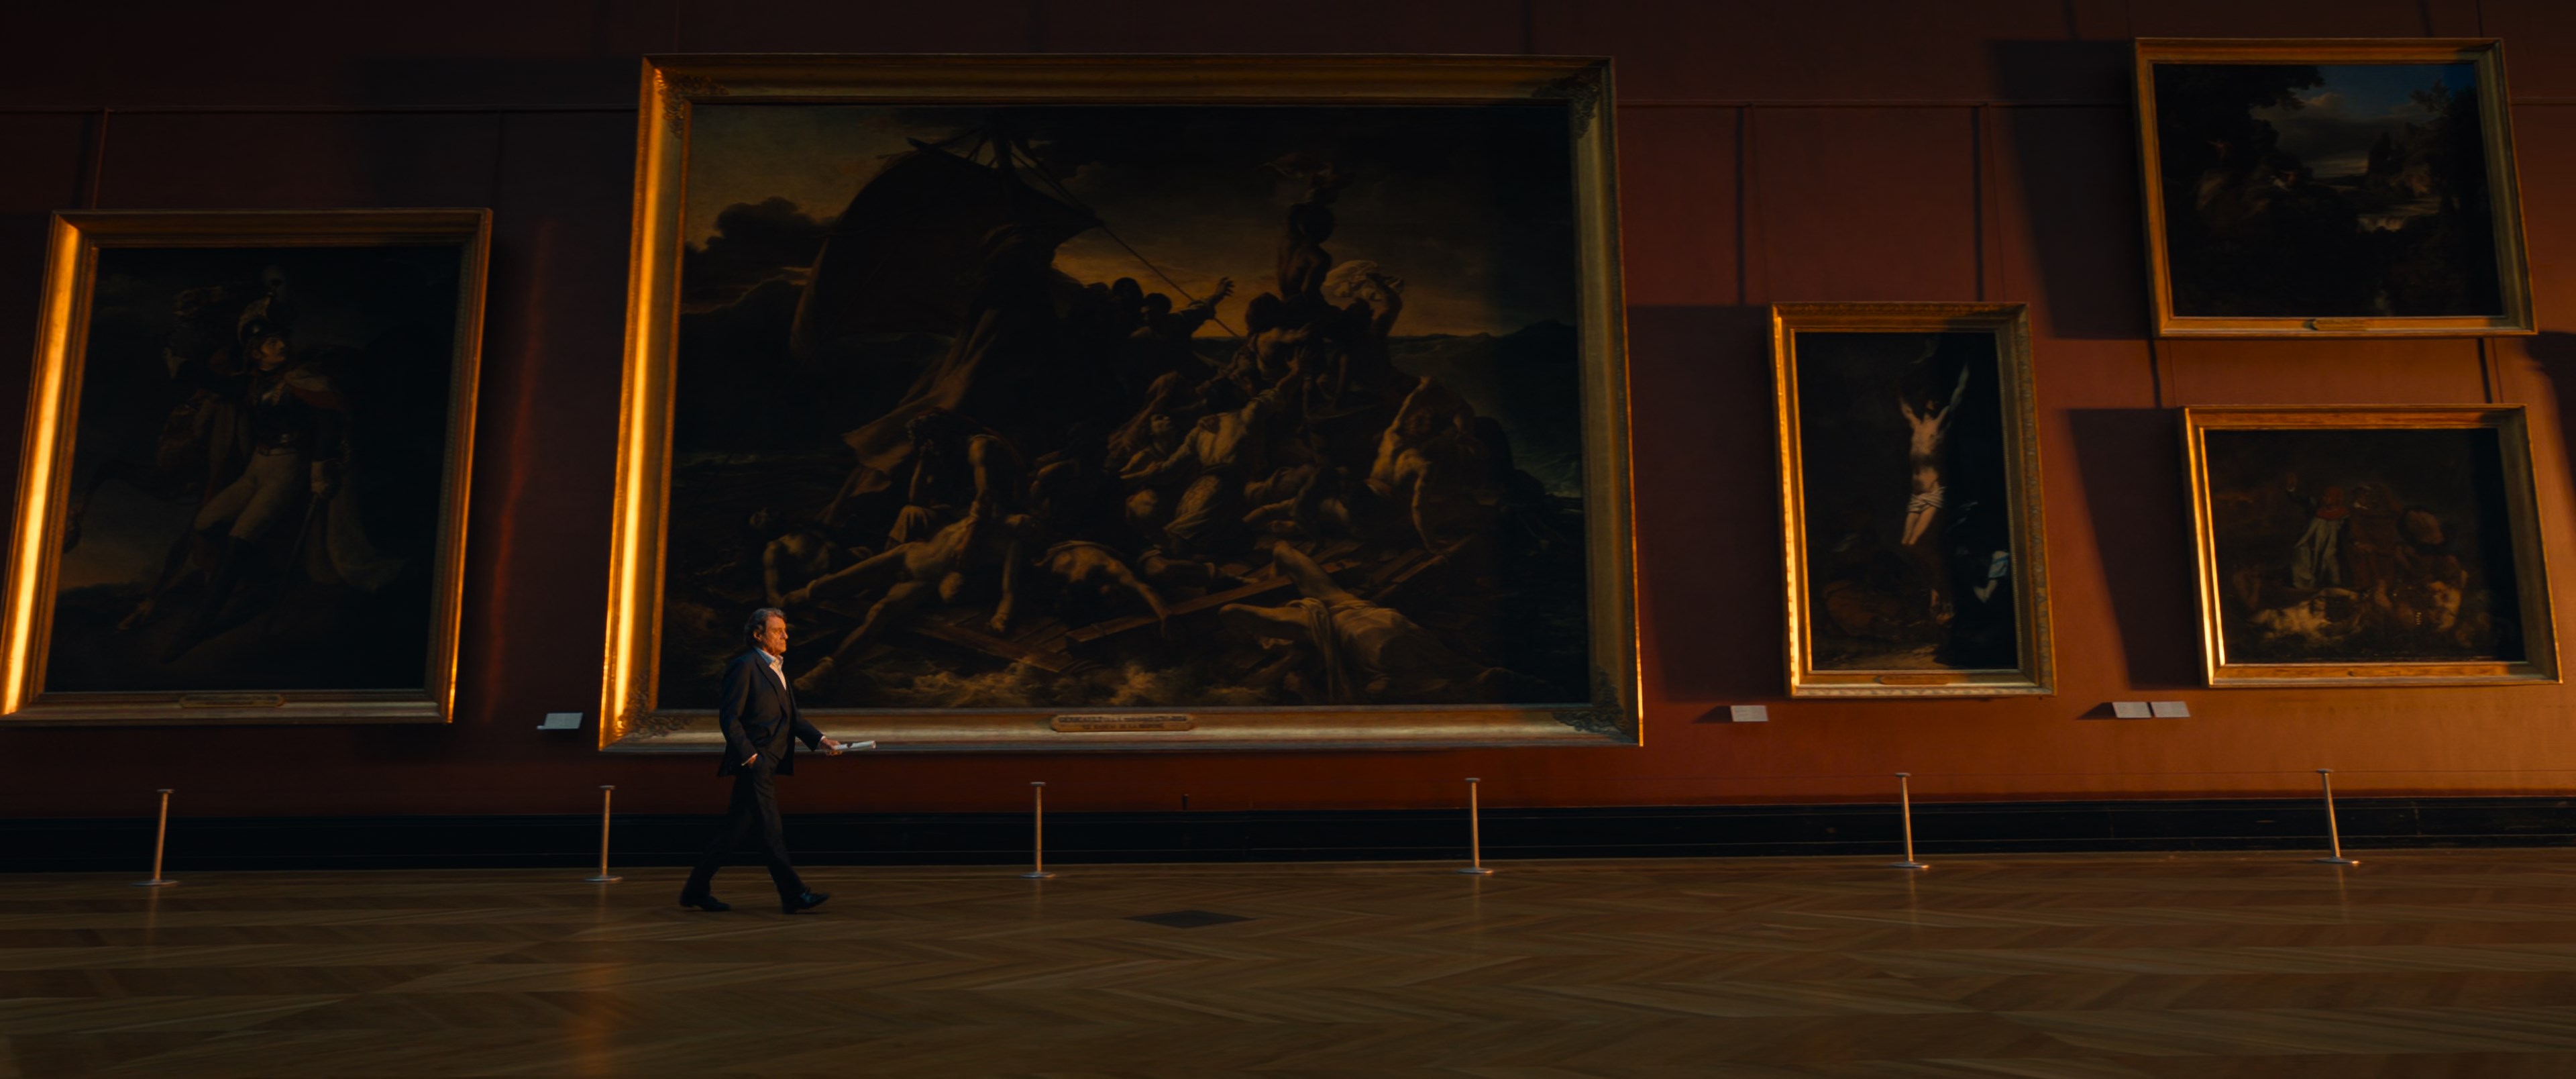 General 3840x1608 John Wick Chapter 4 Ian McShane Louvre painting movies film stills walking men suits hands in pockets